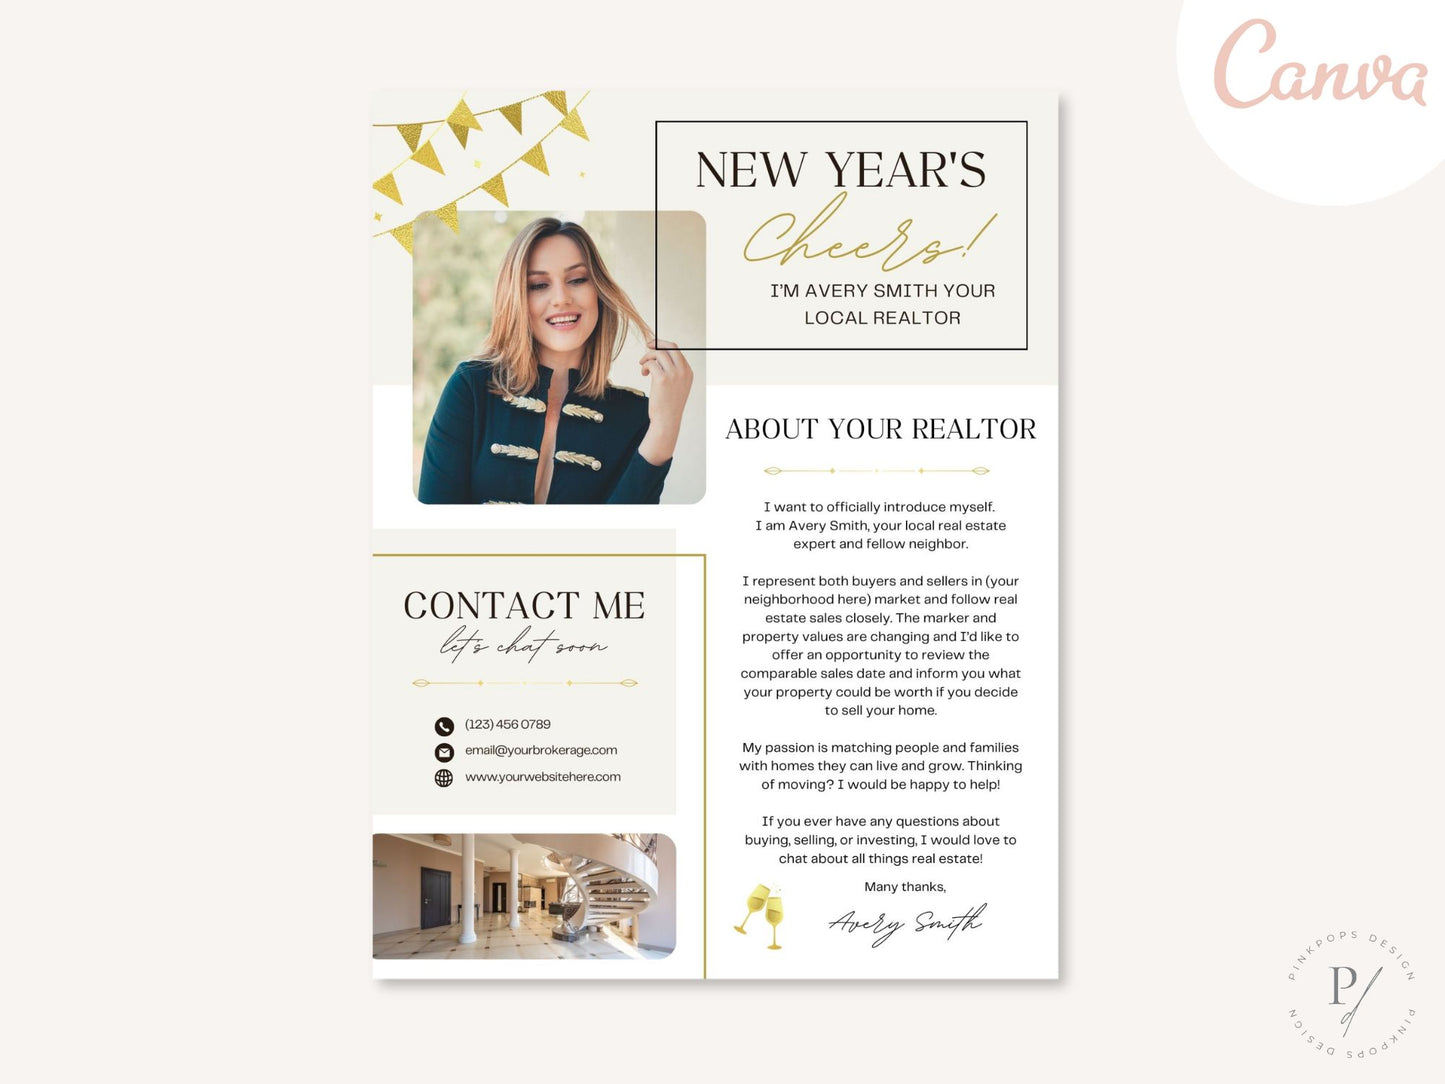 Real Estate New Year Agent Introduction Letter: Creating Personal Connections with Clients and Prospects as the New Year Begins